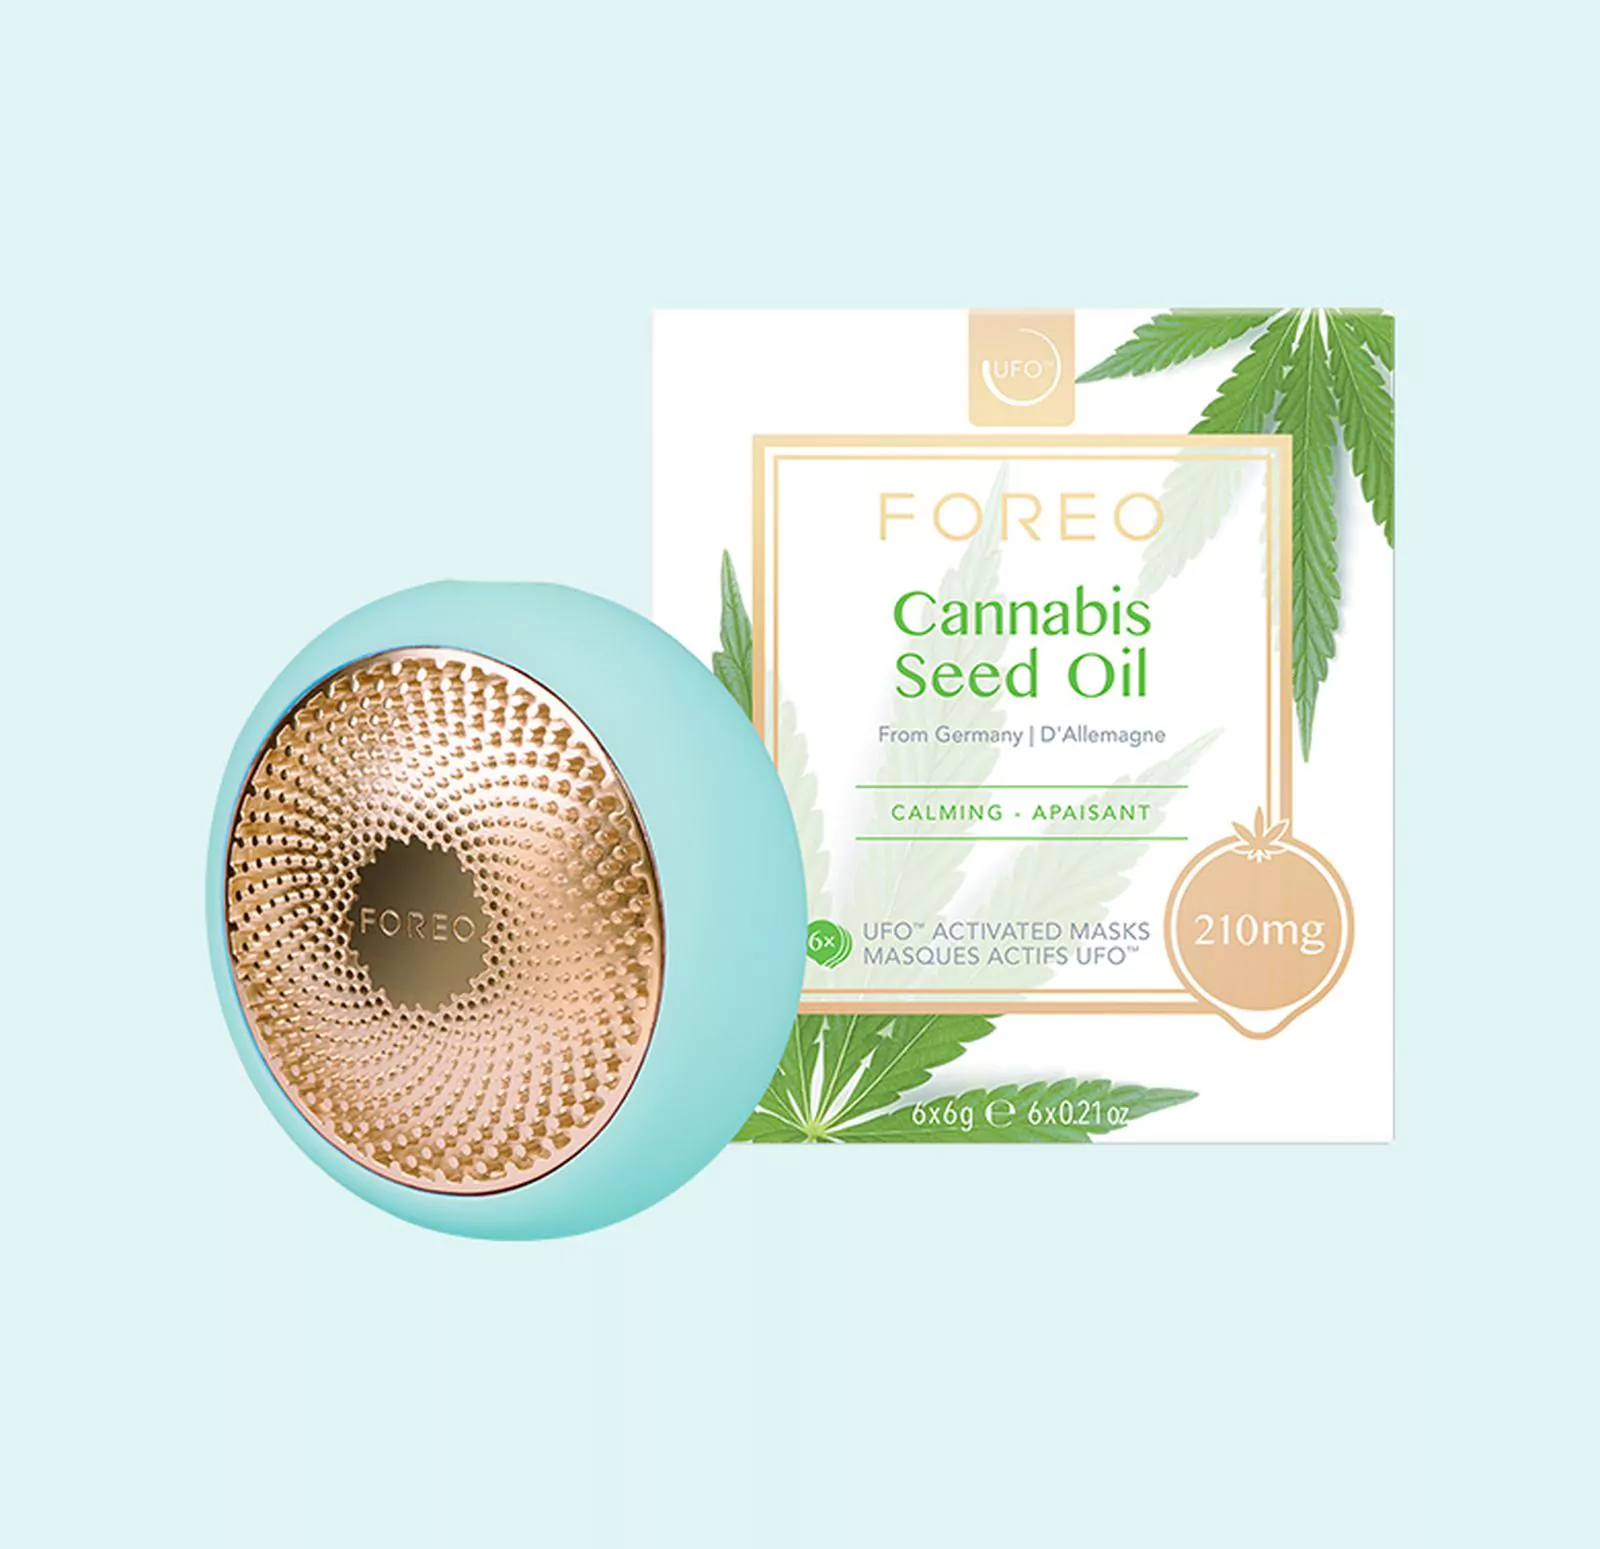 Foreo Cannabis Seed Oil Mask